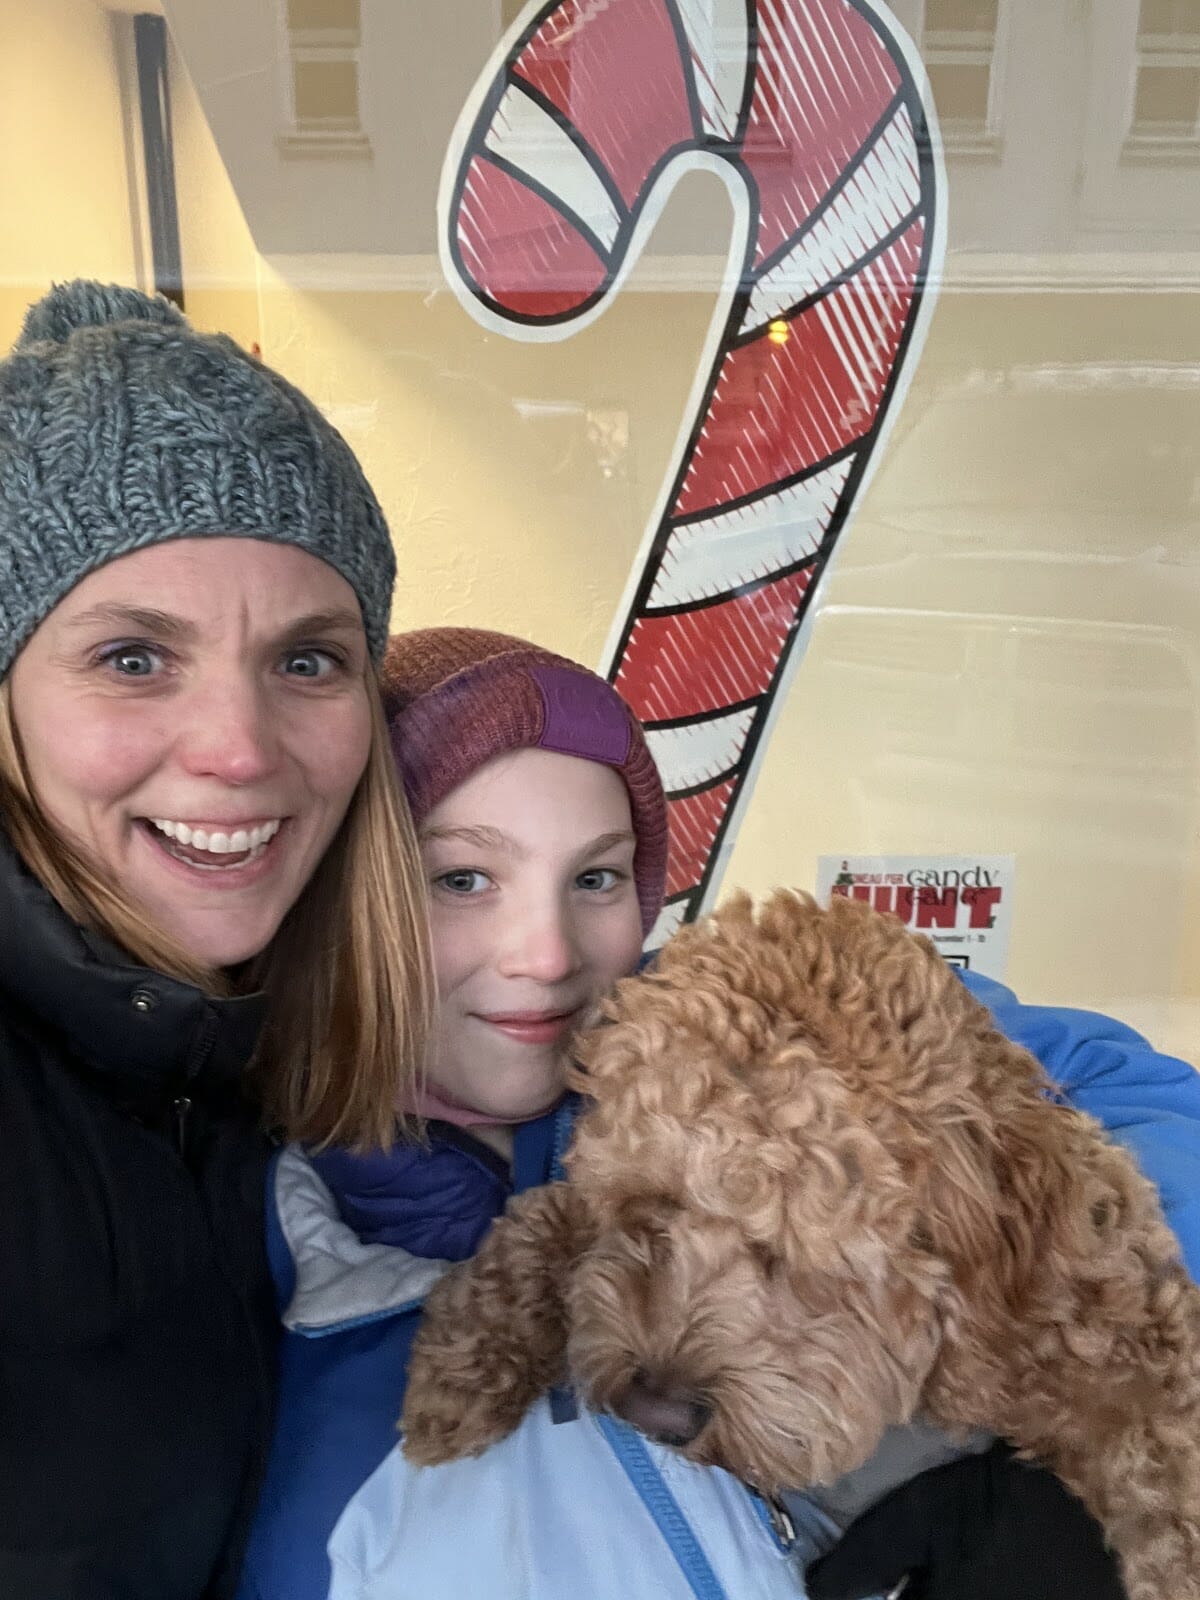 A woman, young girl and curly-haird puppy in front of a candy cane.